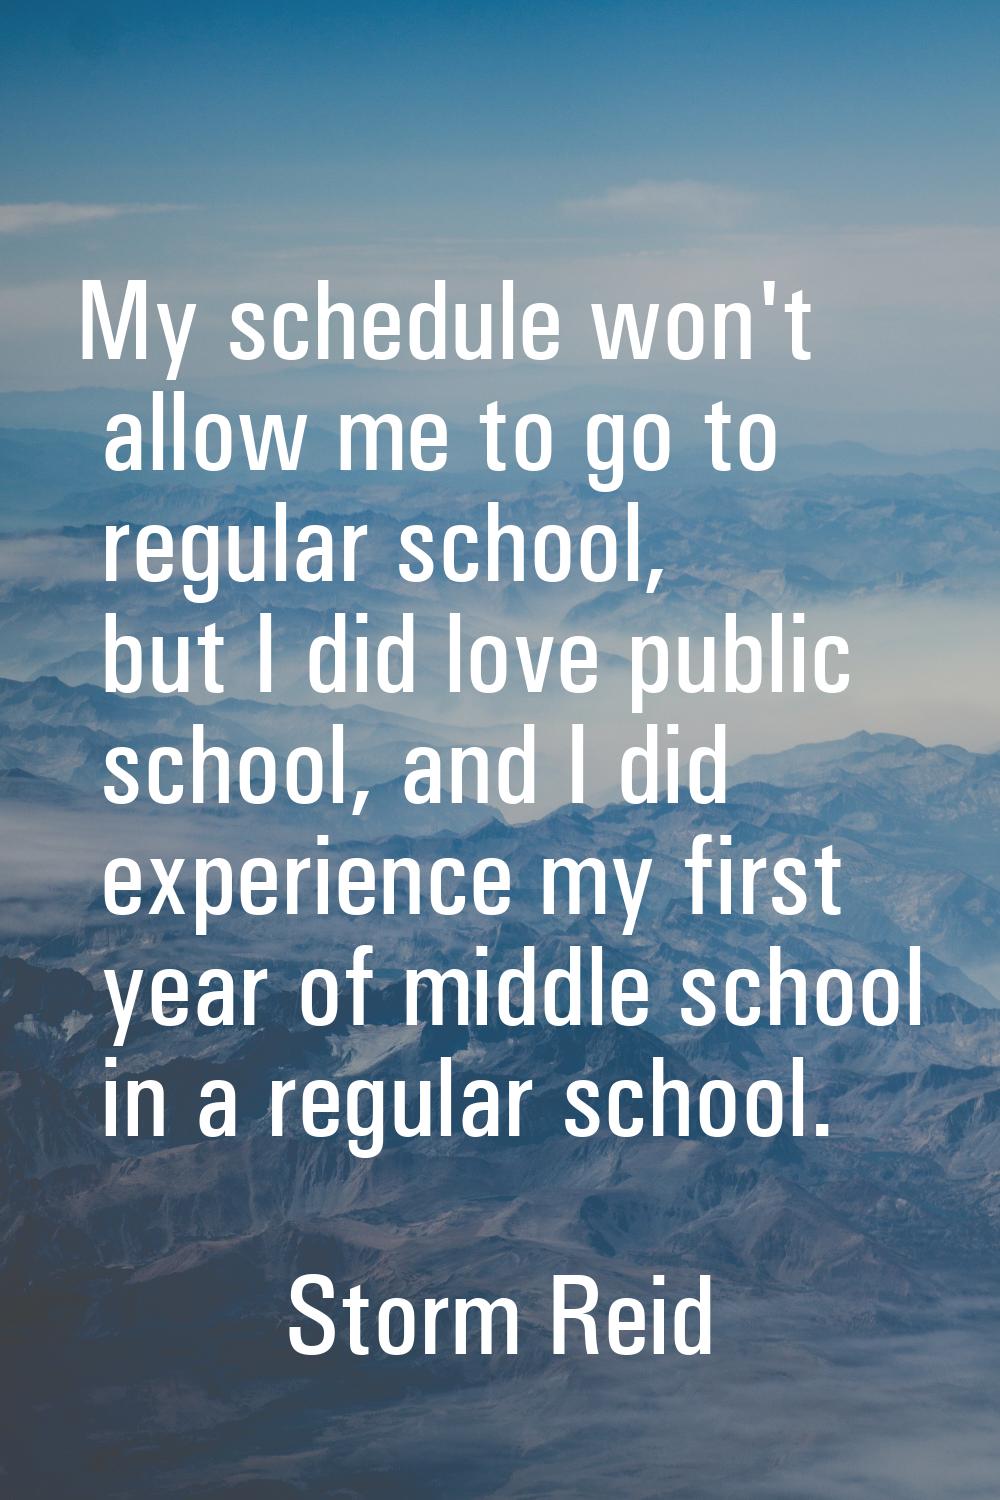 My schedule won't allow me to go to regular school, but I did love public school, and I did experie